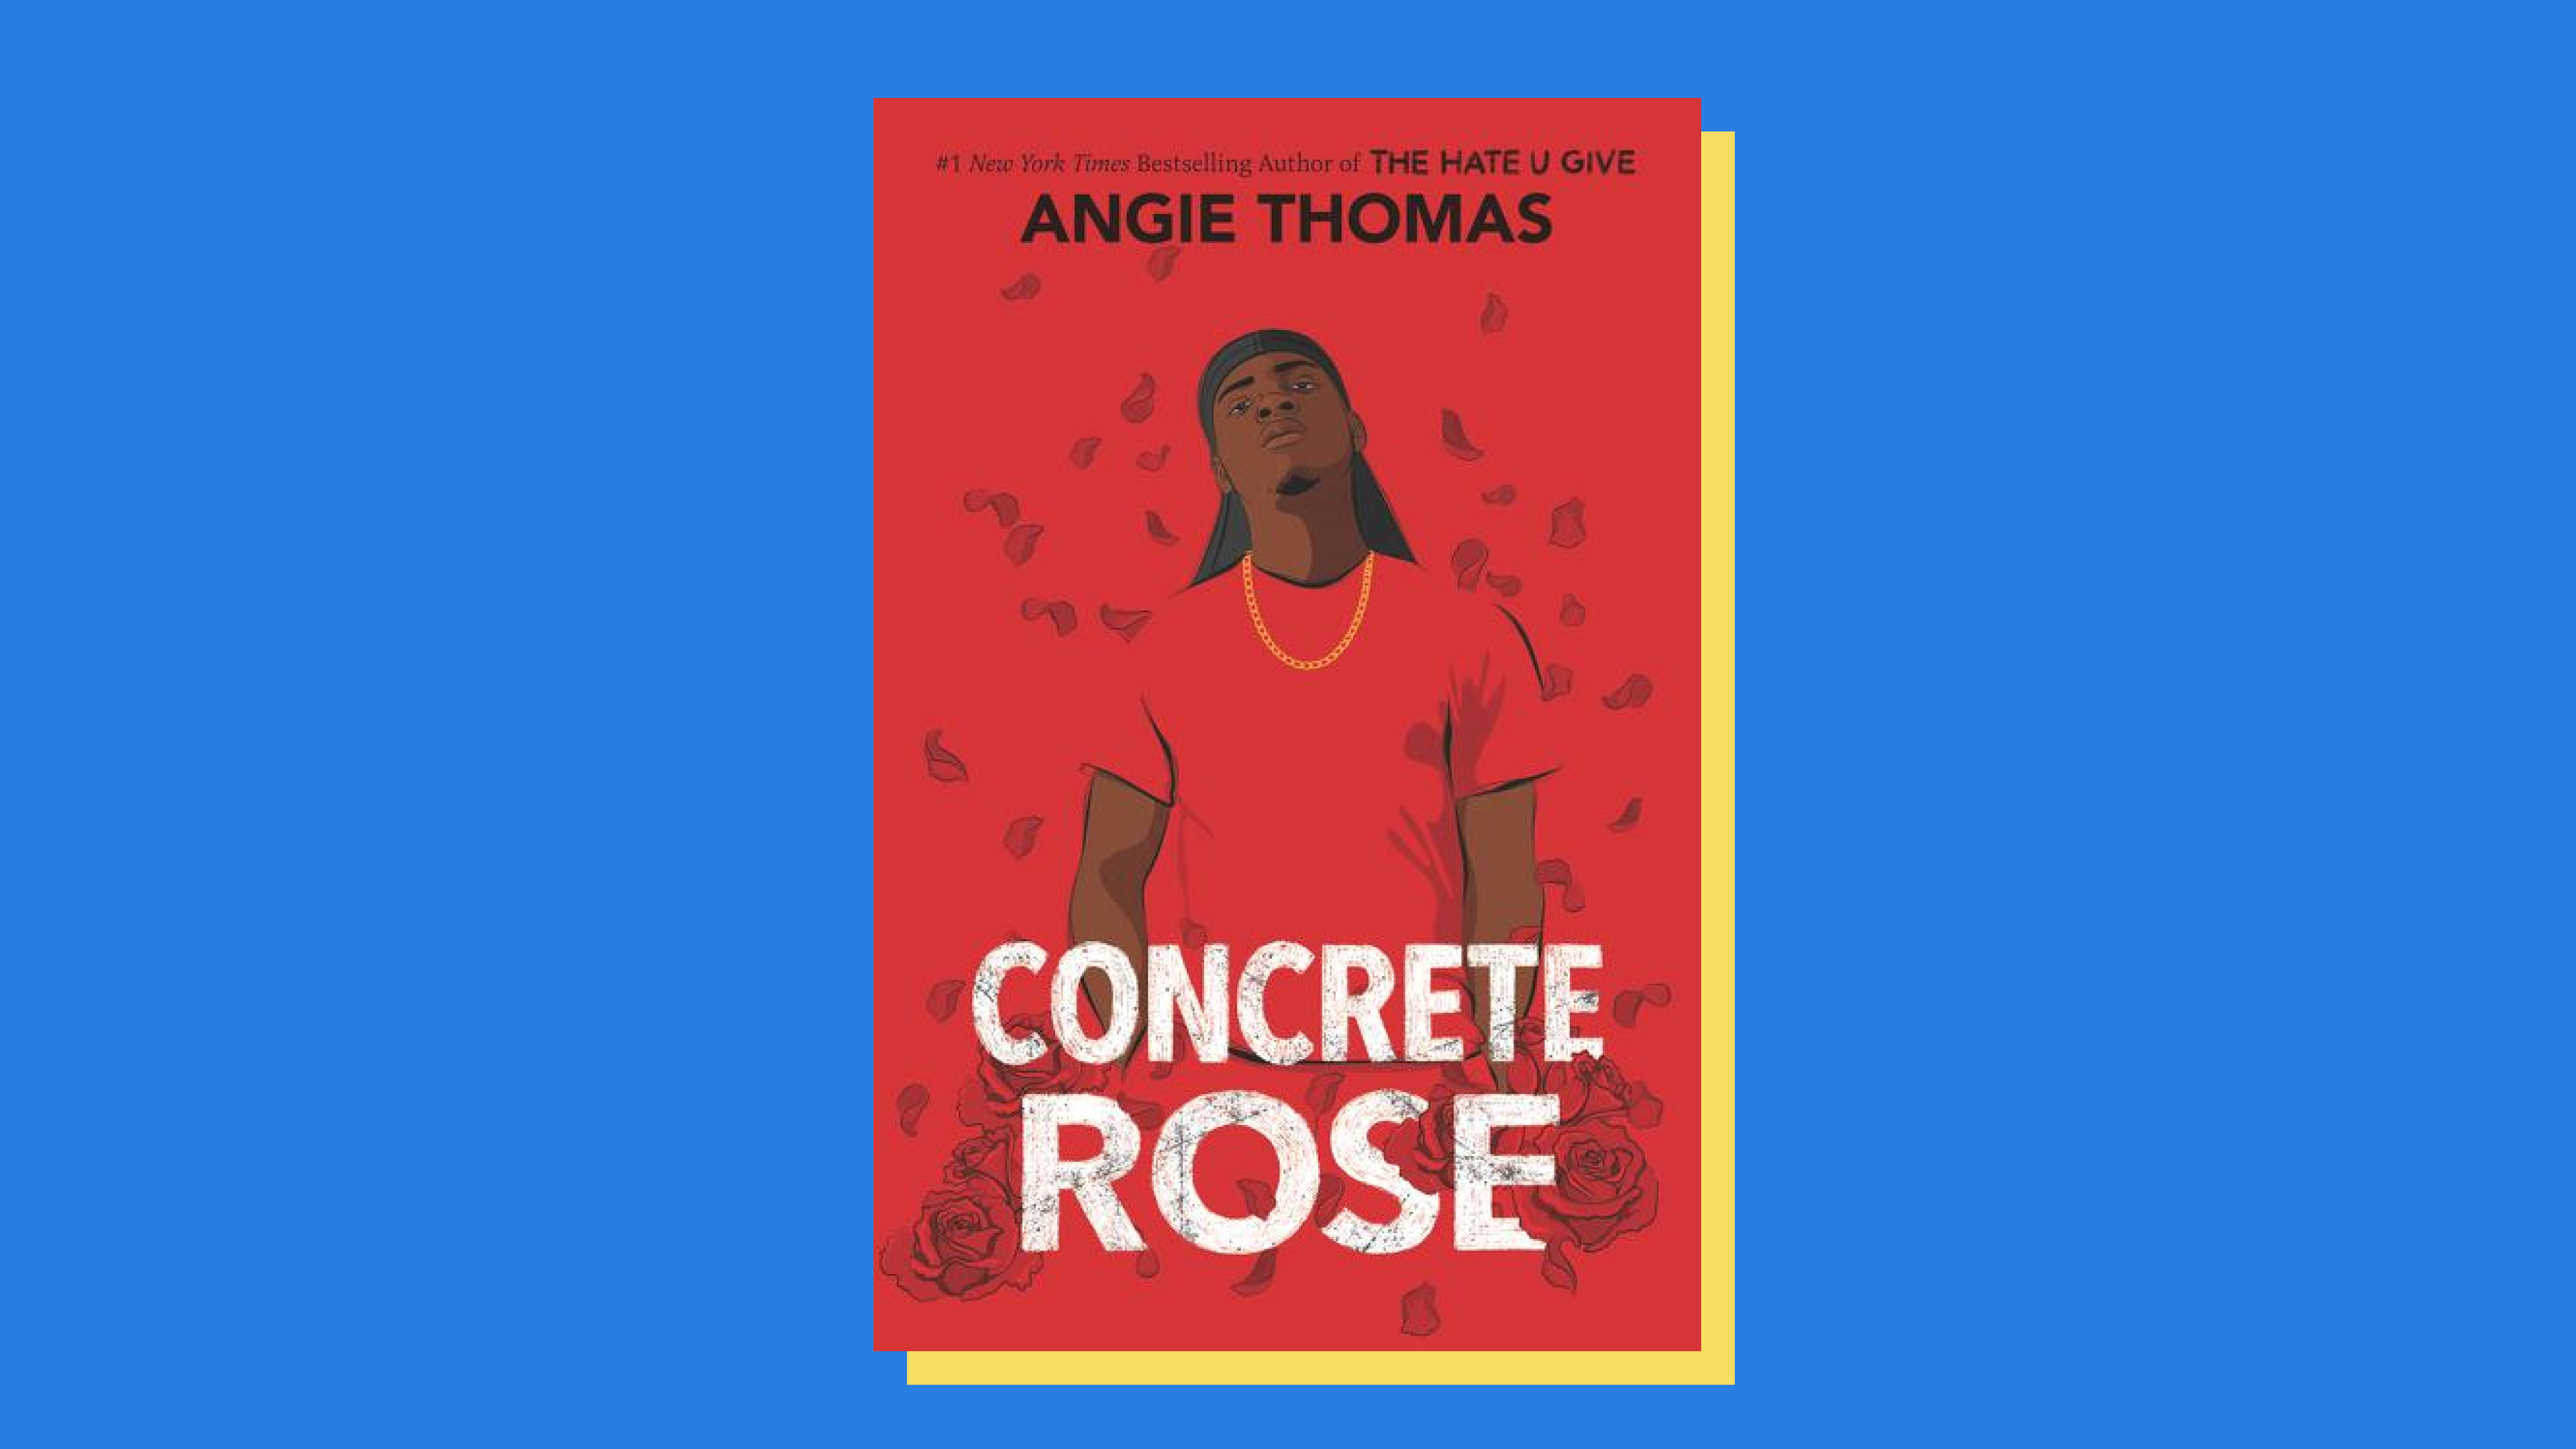 “Concrete Rose” by Angie Thomas